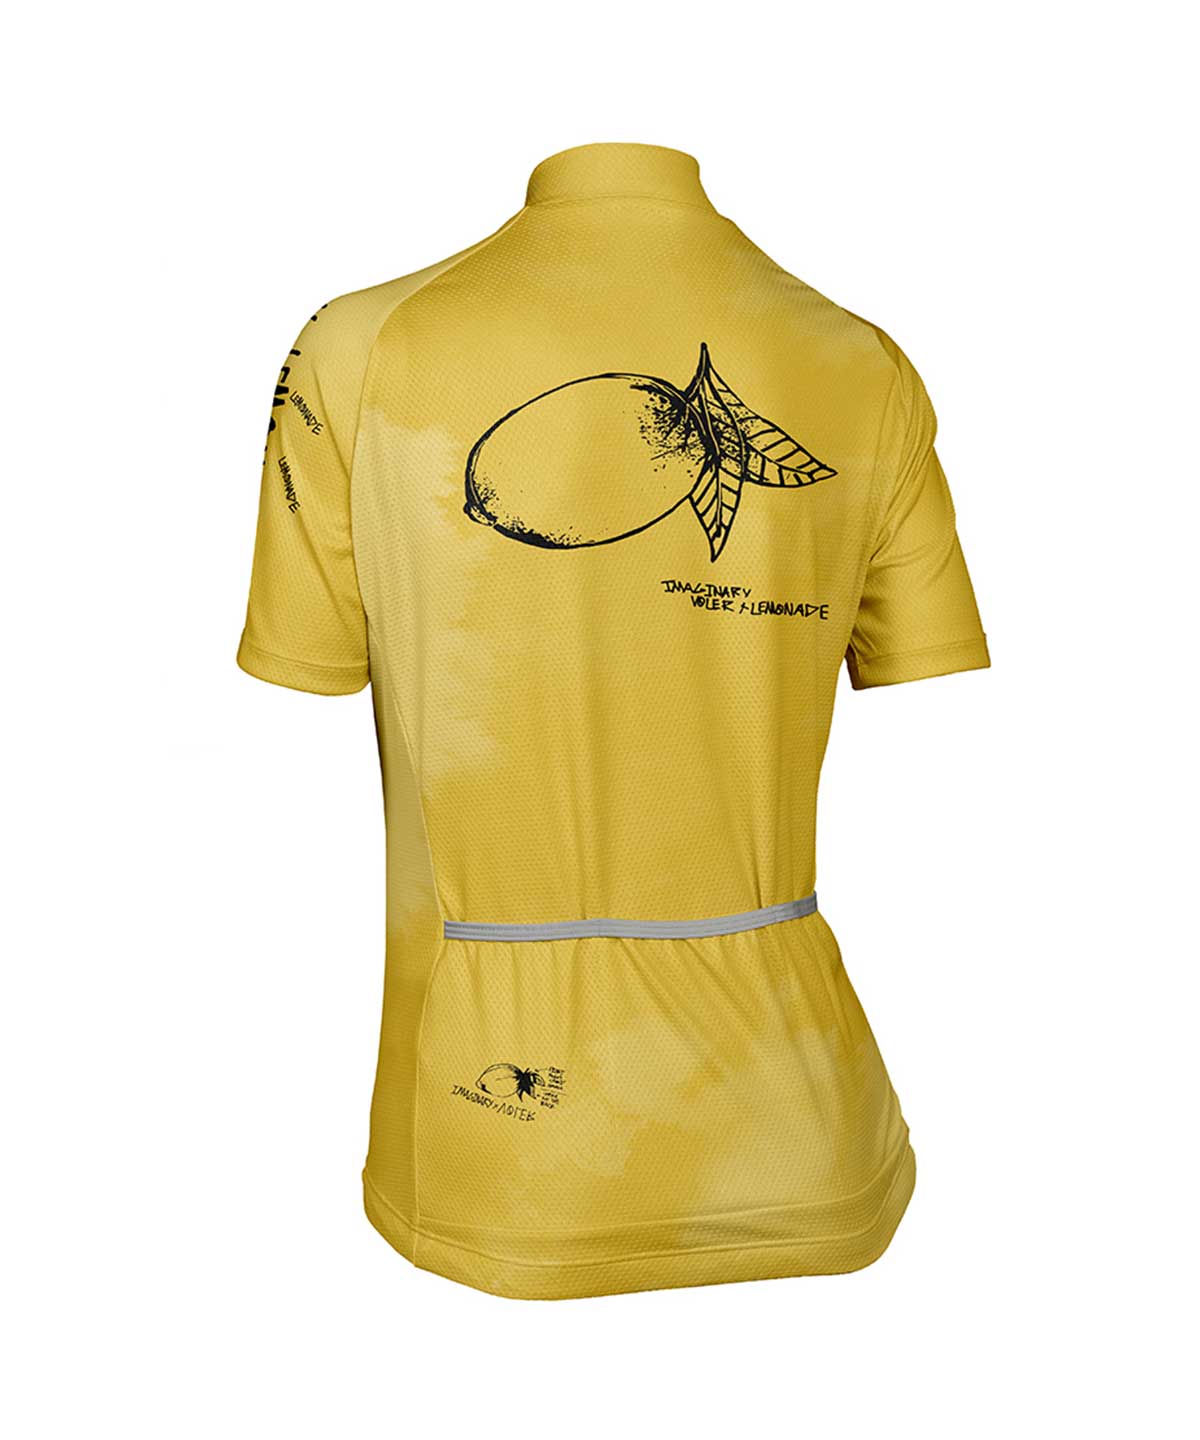 W. PELOTON JERSEY - IMAGINARY COLLECTIVE